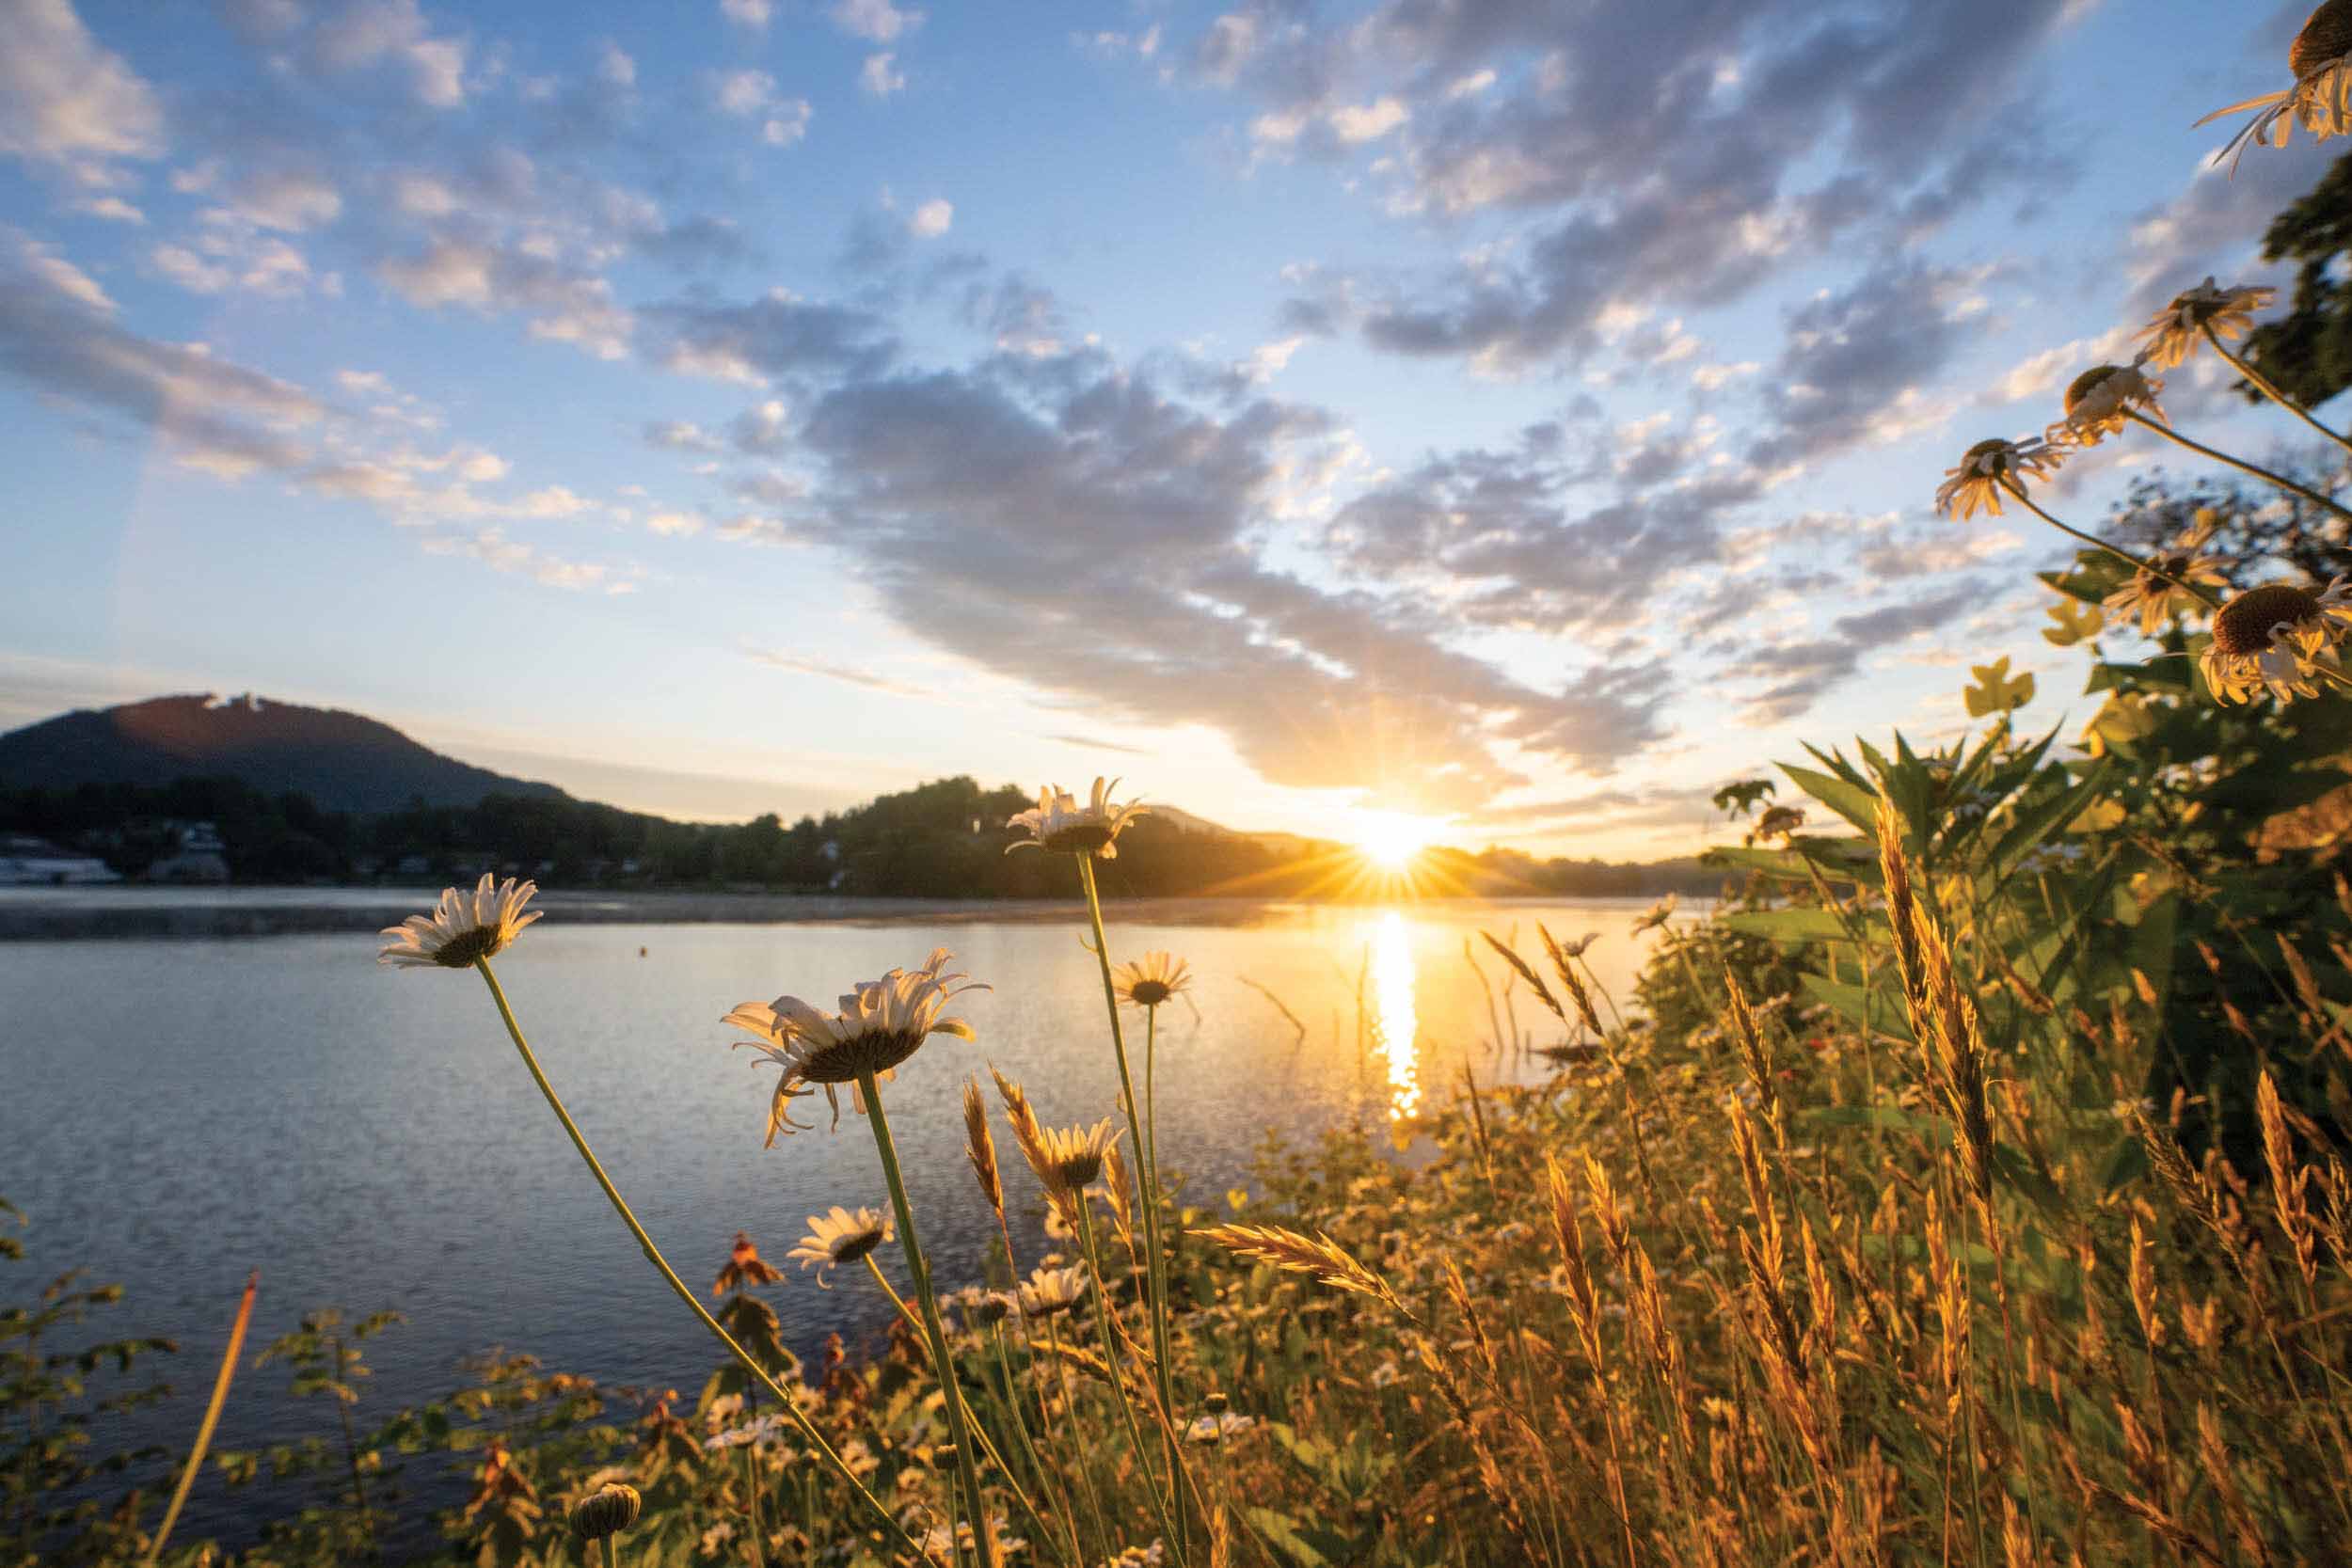 Photo of wildflowers growing along the lake edge during sunset